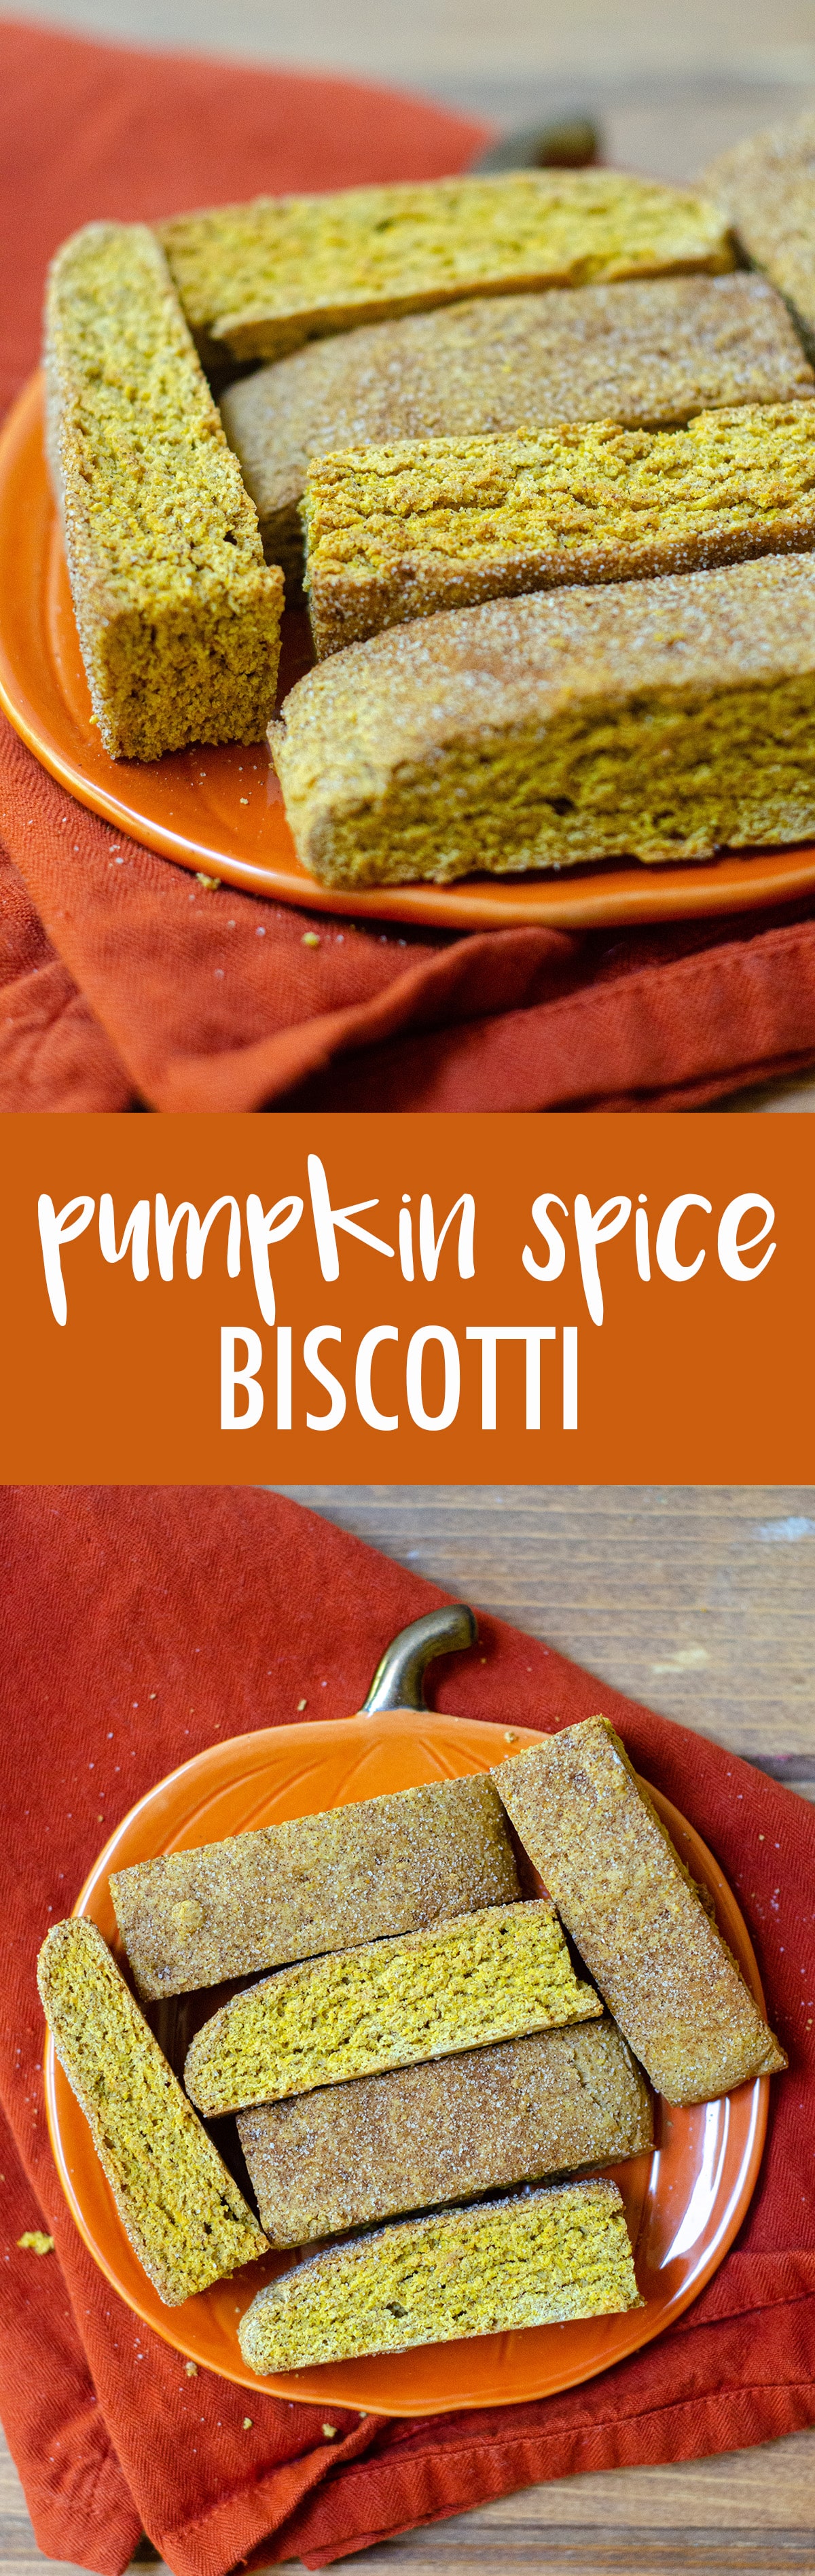 Pumpkin Spice Biscotti: Crunchy, flavorful biscotti get a fall makeover with real pumpkin purée and pumpkin pie spices. via @frshaprilflours